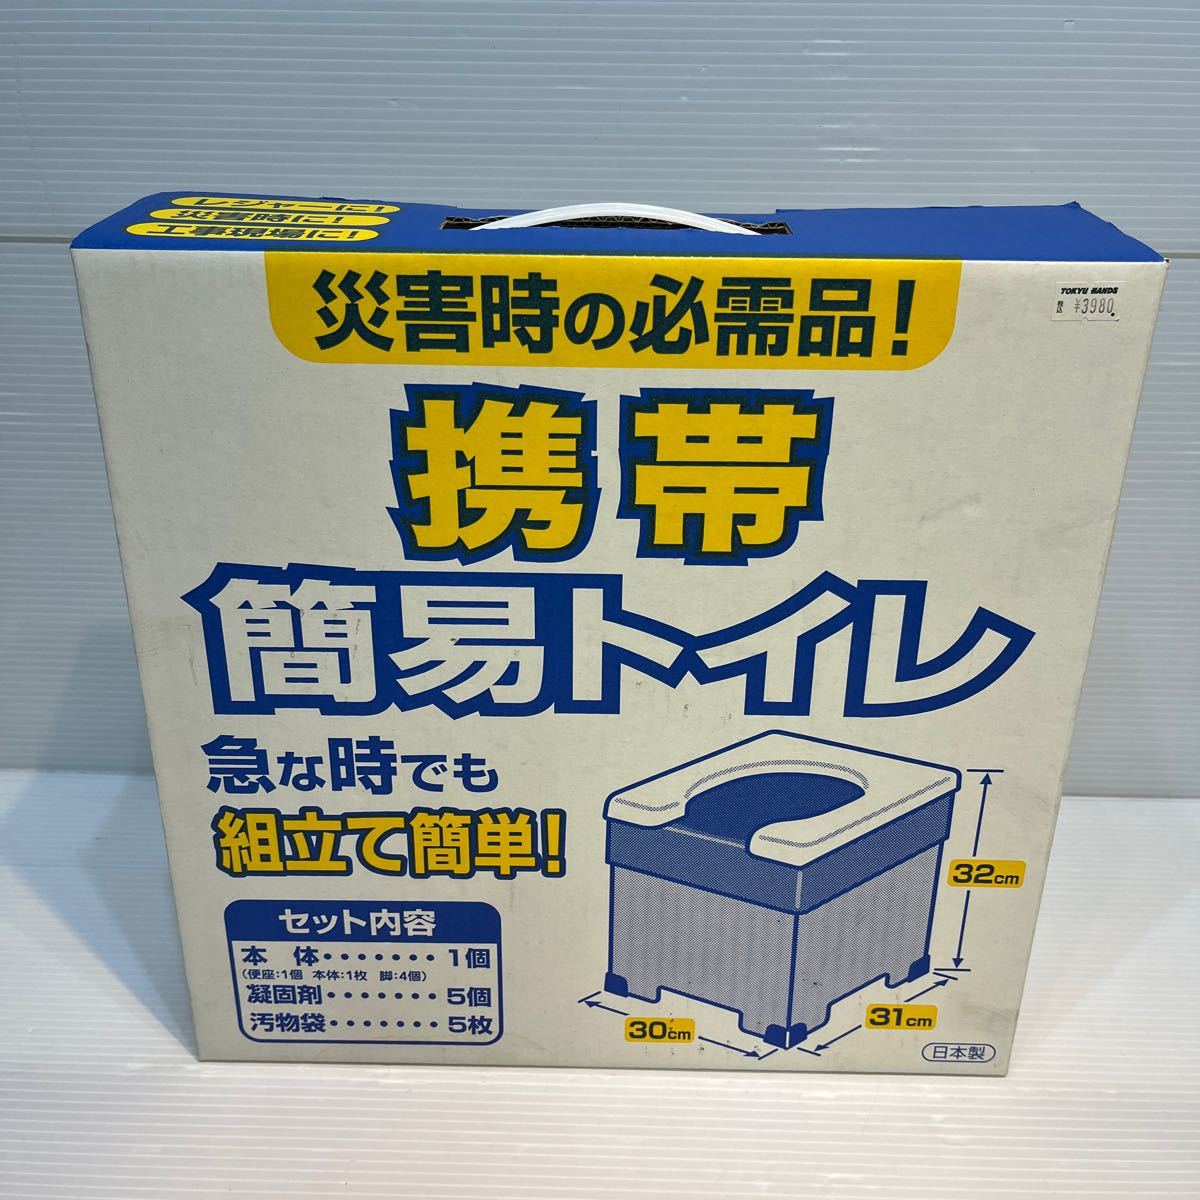  new goods unused sun ko- mobile simple toilet at the time of disaster necessities control 05